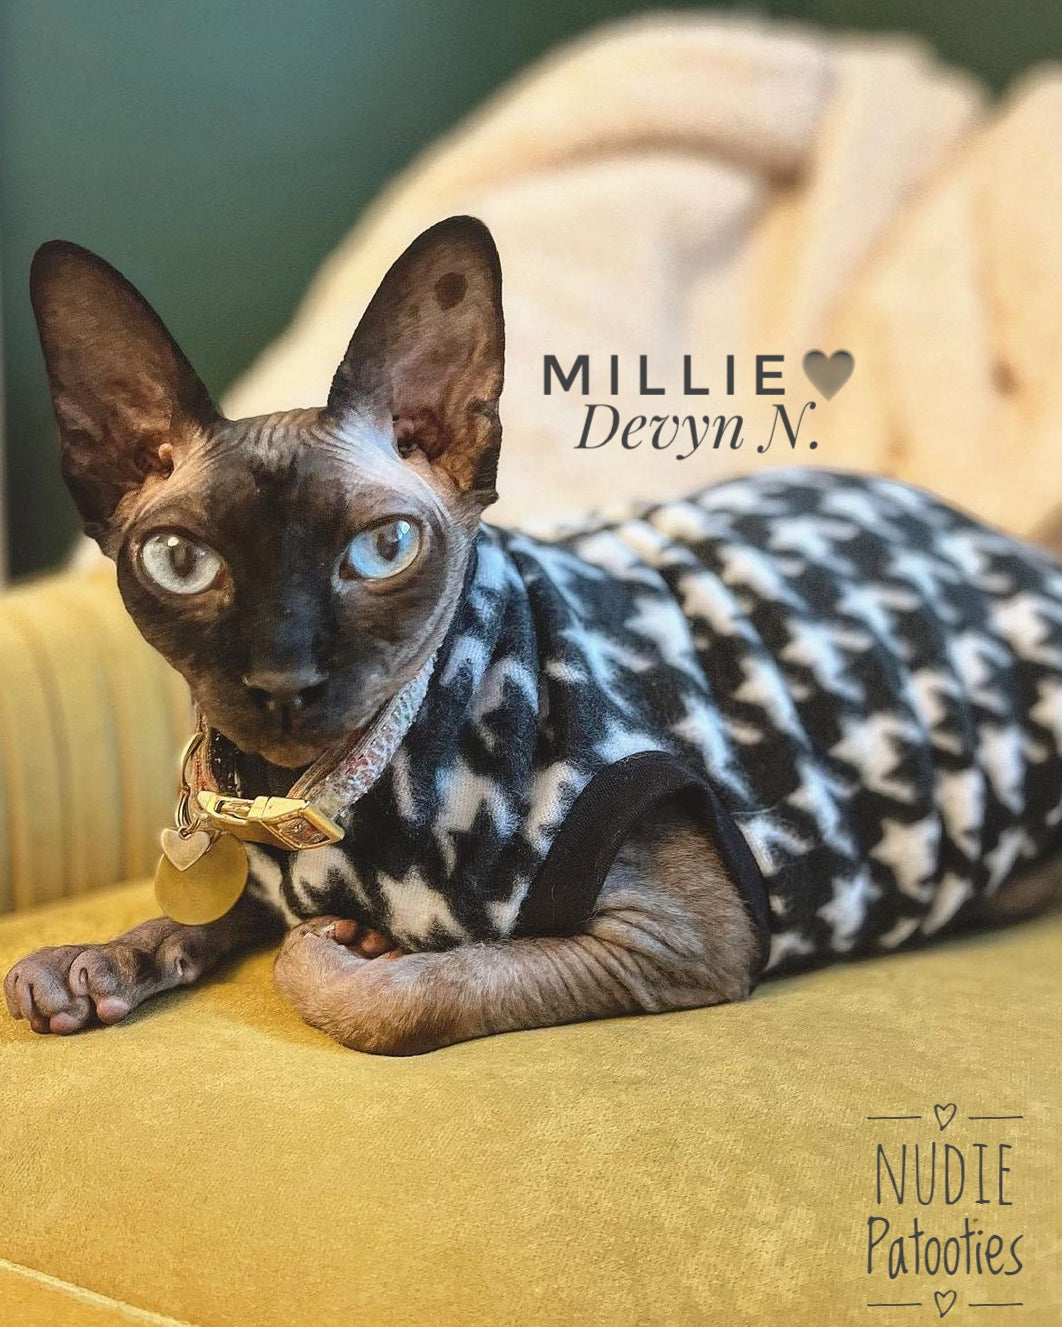 Sphynx cat and kitten shirt sweater. Sphynx cat clothes